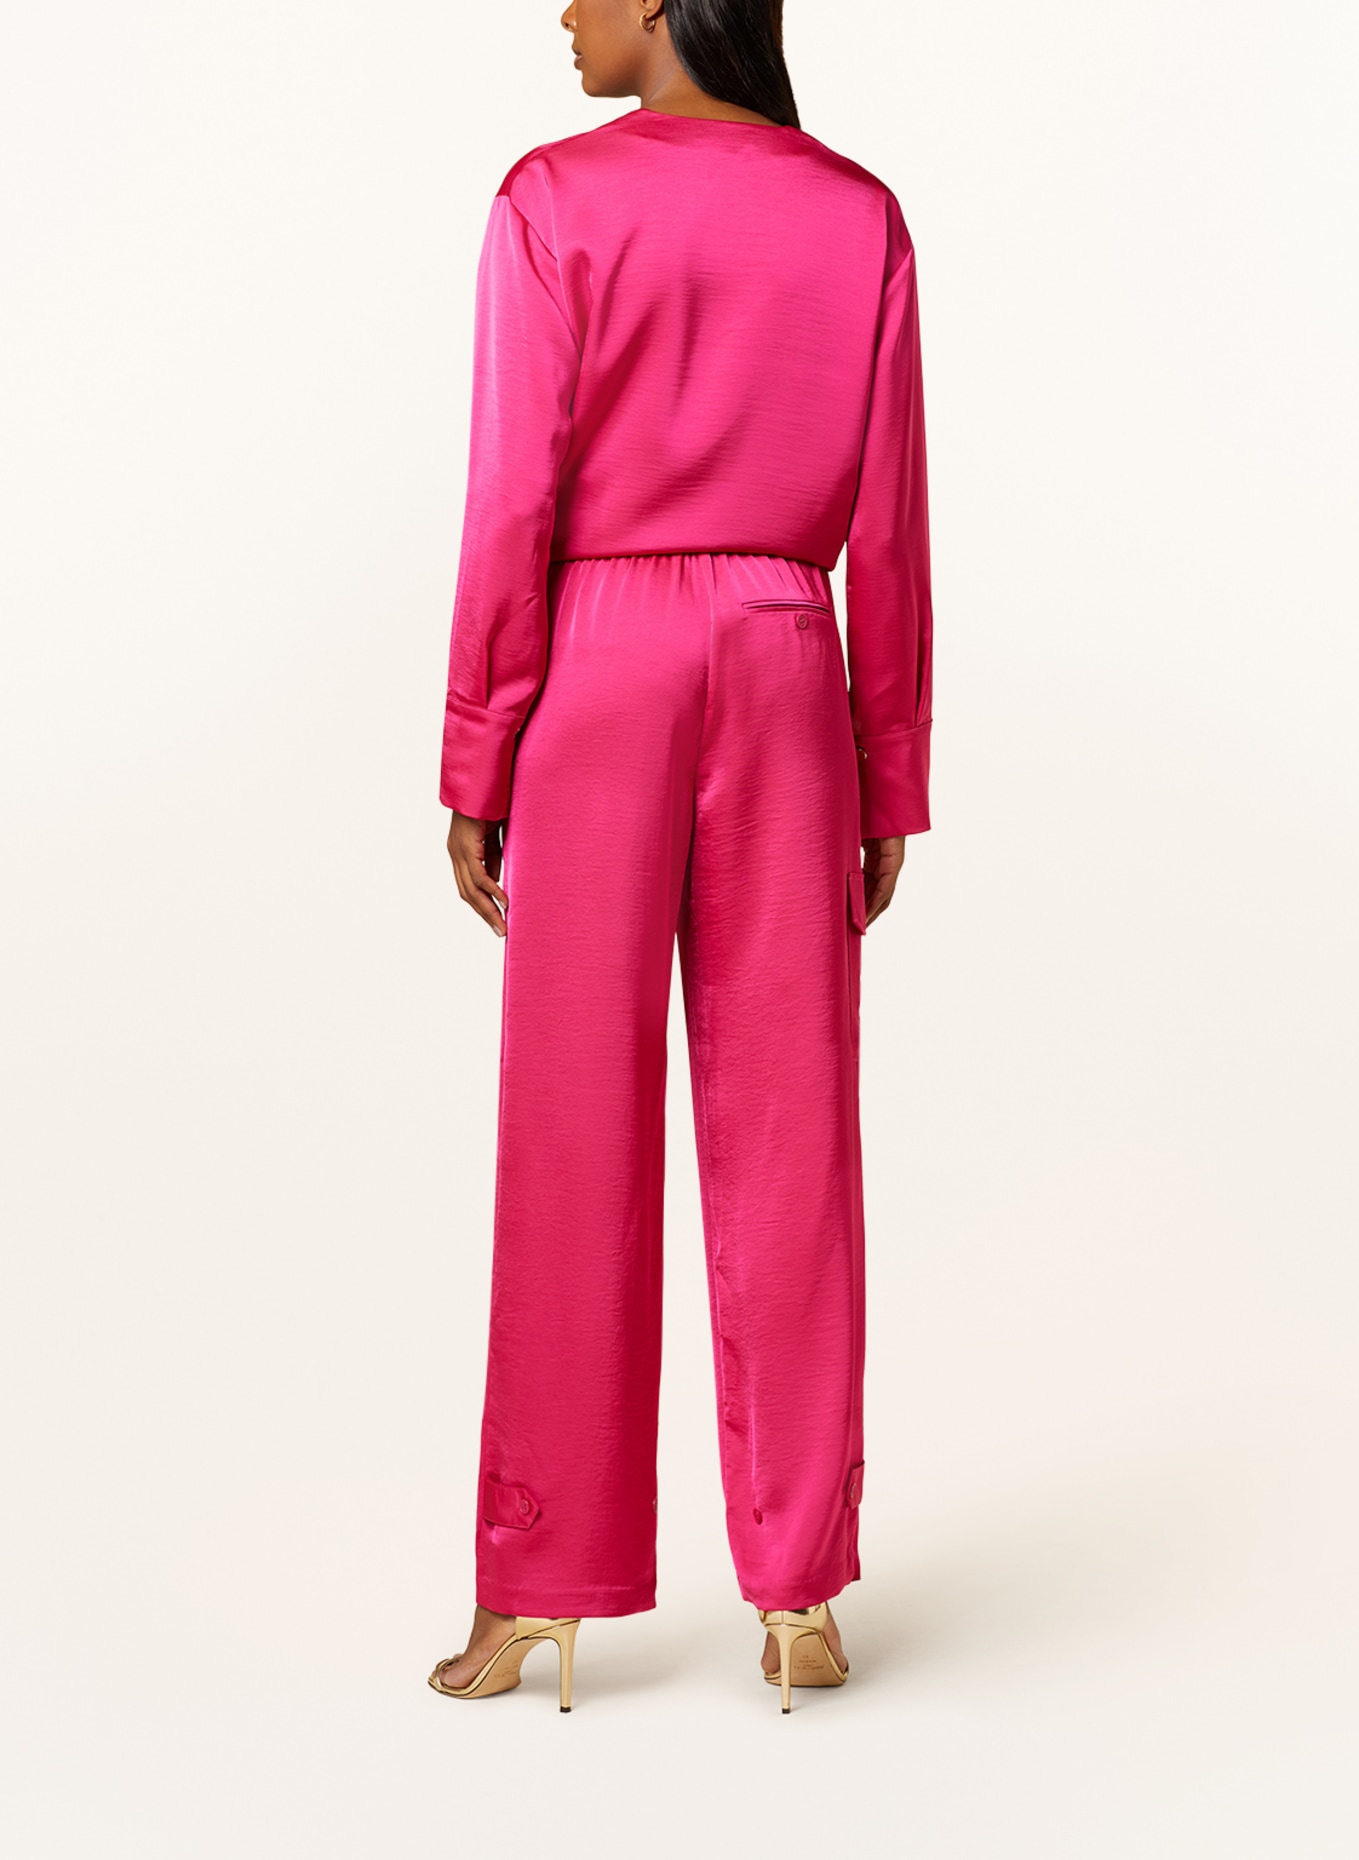 DANTE6 Shirt blouse BODIL made of satin, Color: PINK (Image 3)